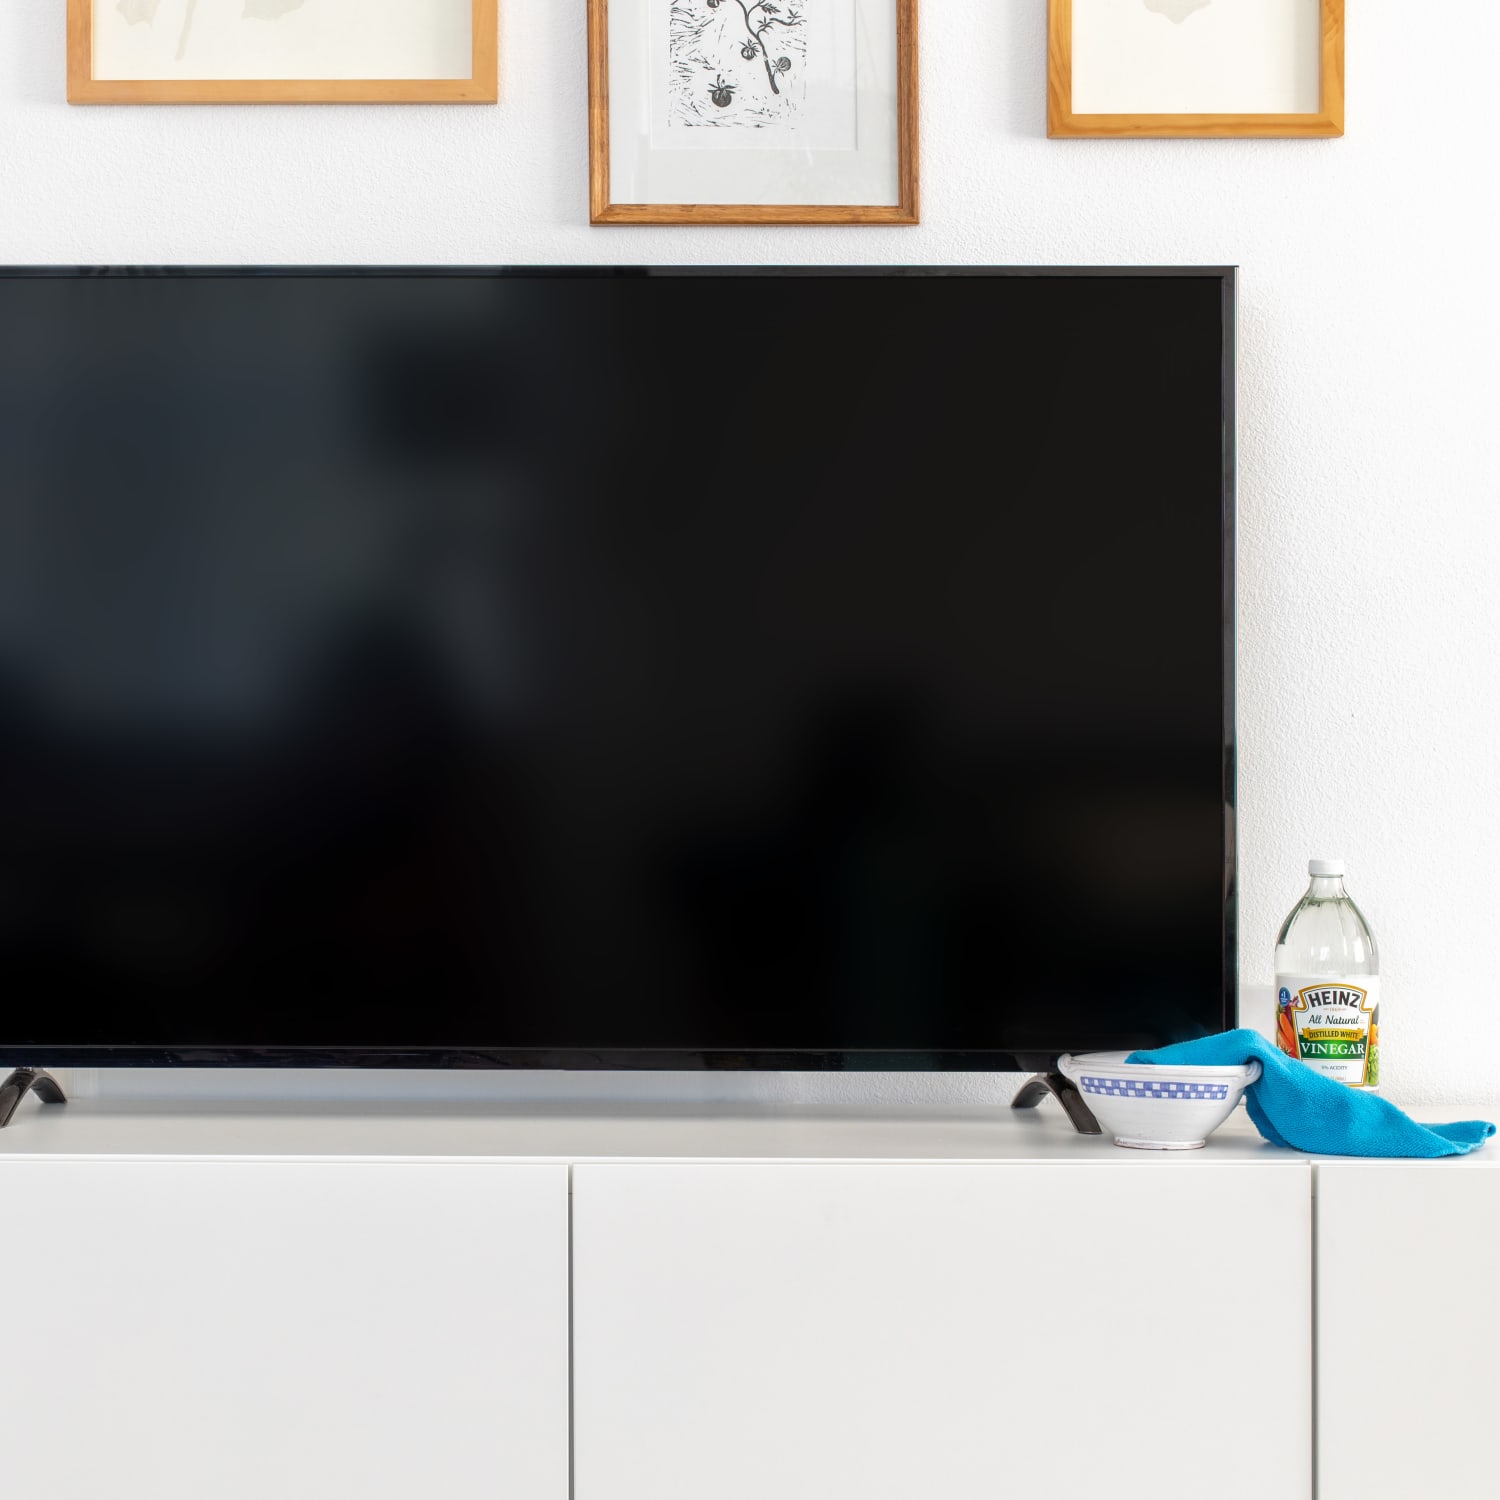 Resident practice tower How To Clean a TV Screen Using Things You Already Have | Kitchn